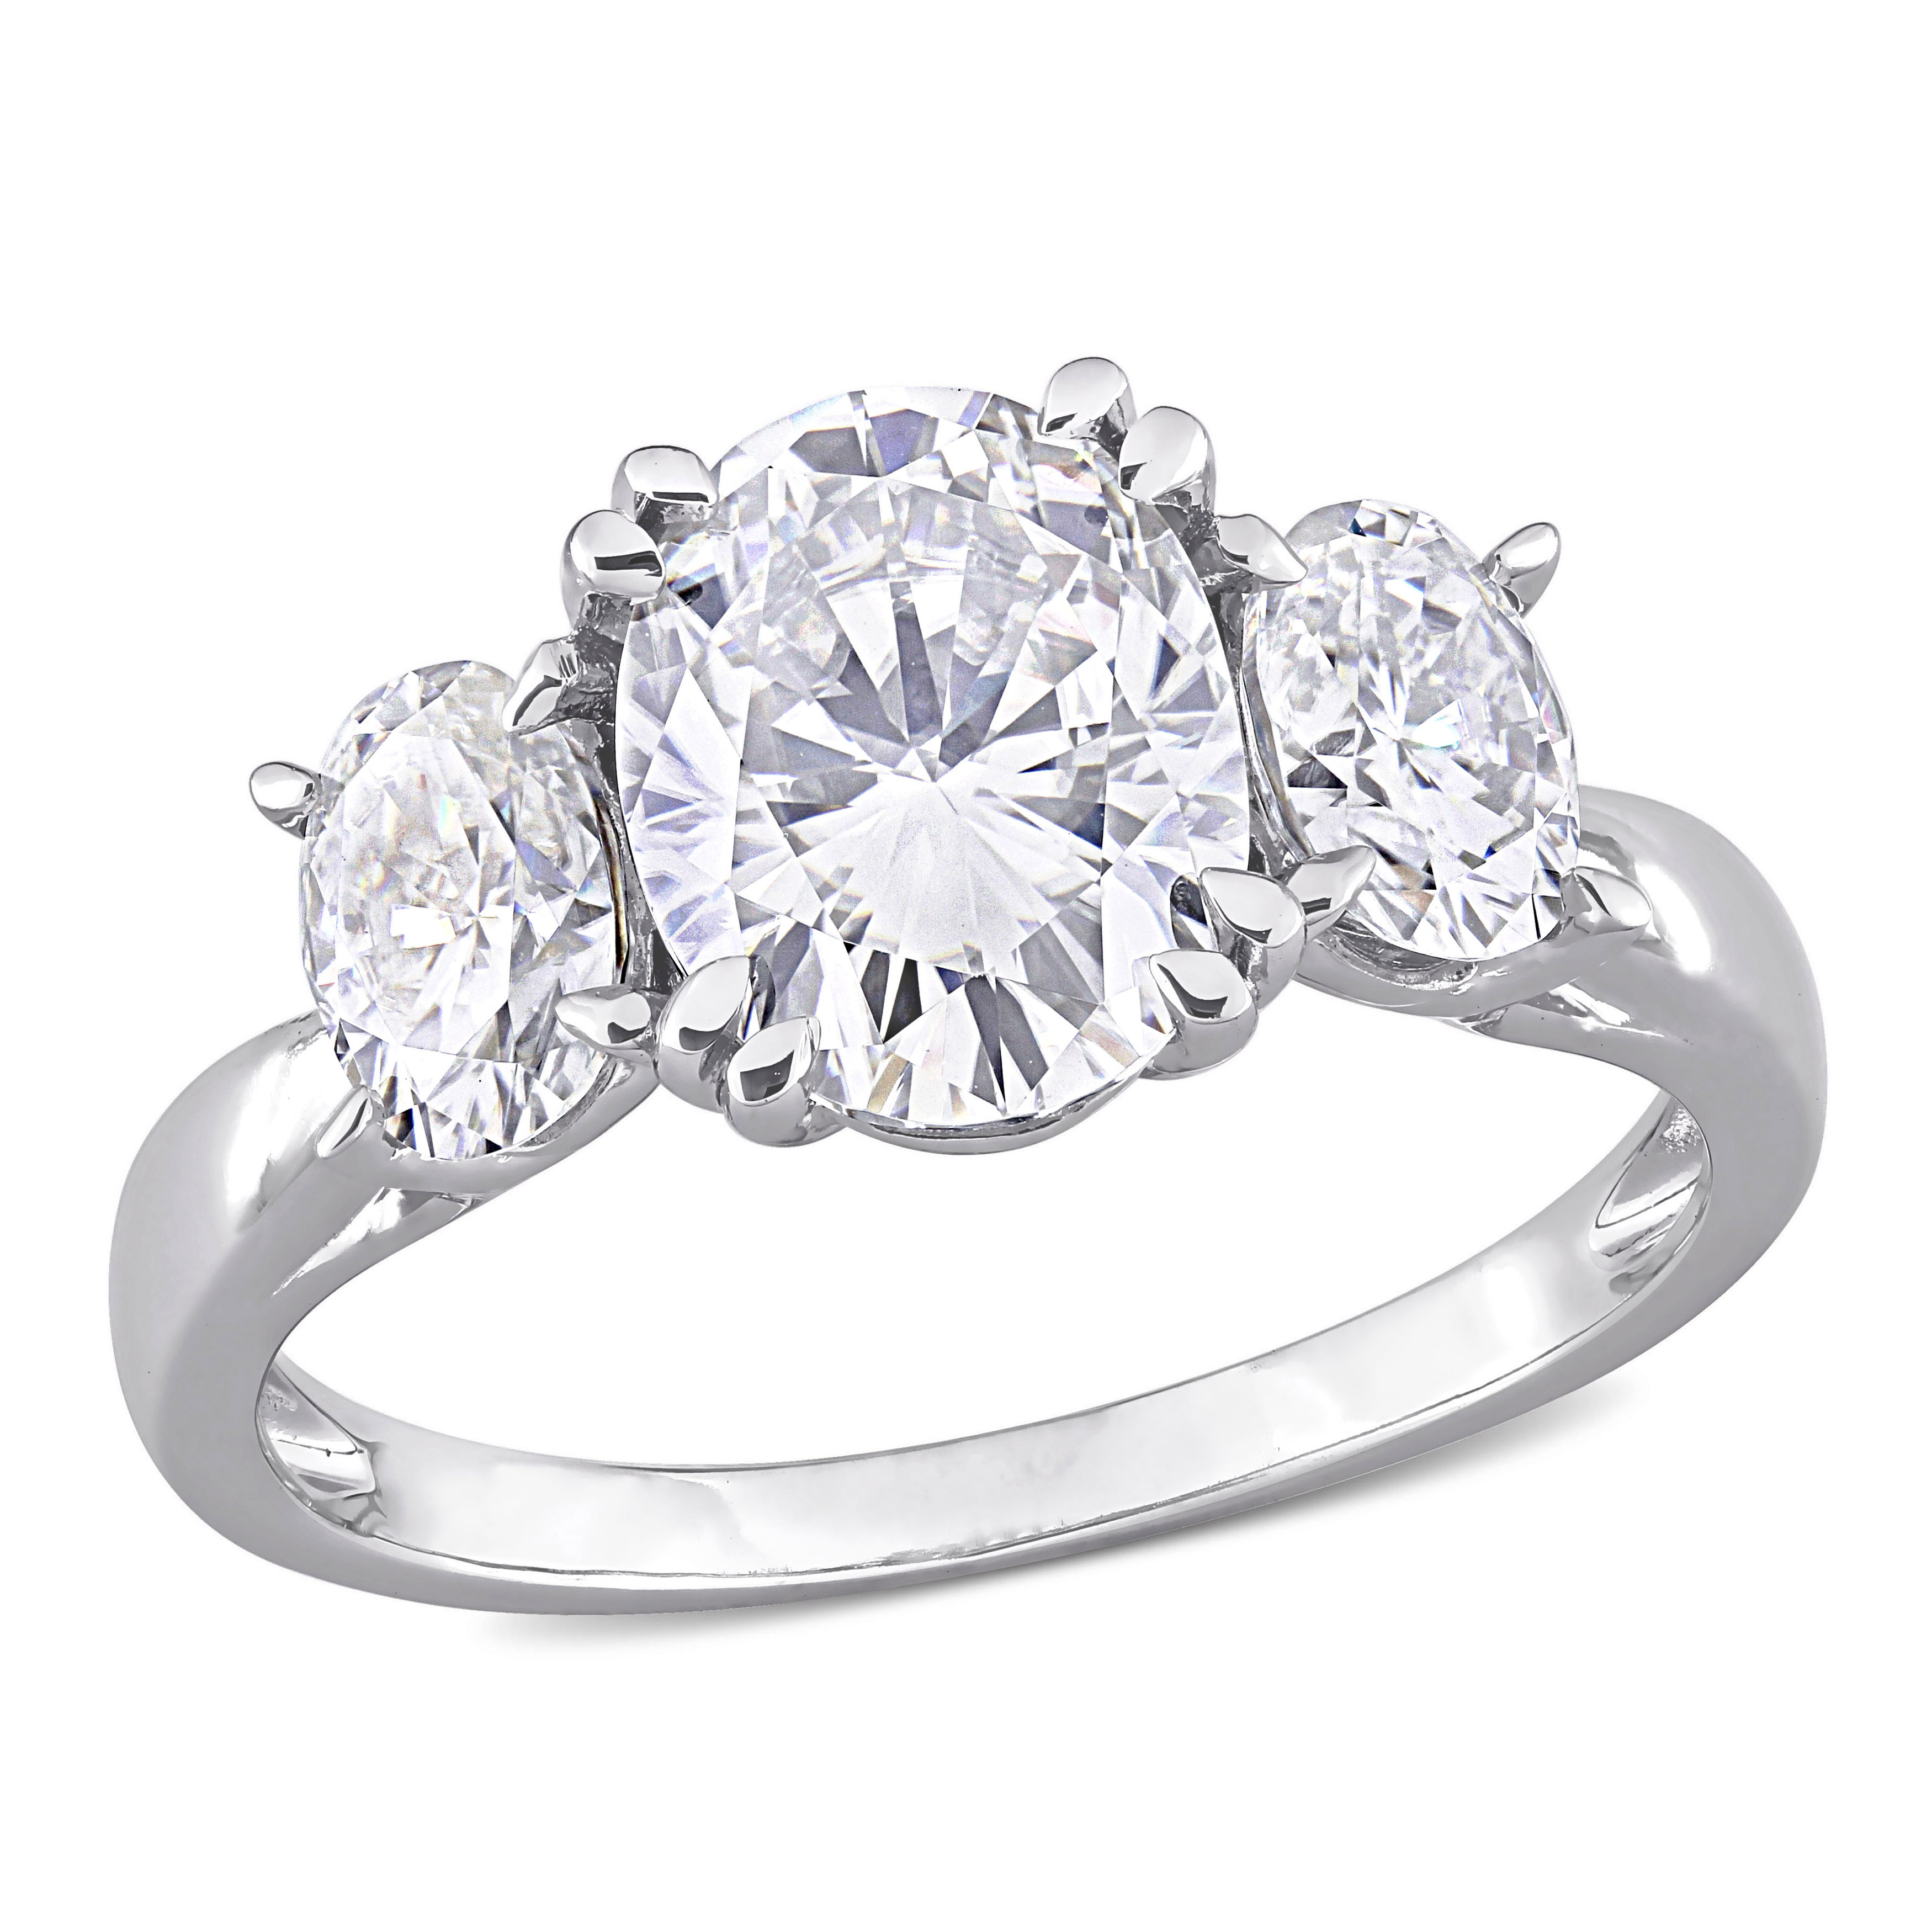 3 CT DEW Created Moissanite 3-Stone Engagement Ring in 10k White Gold